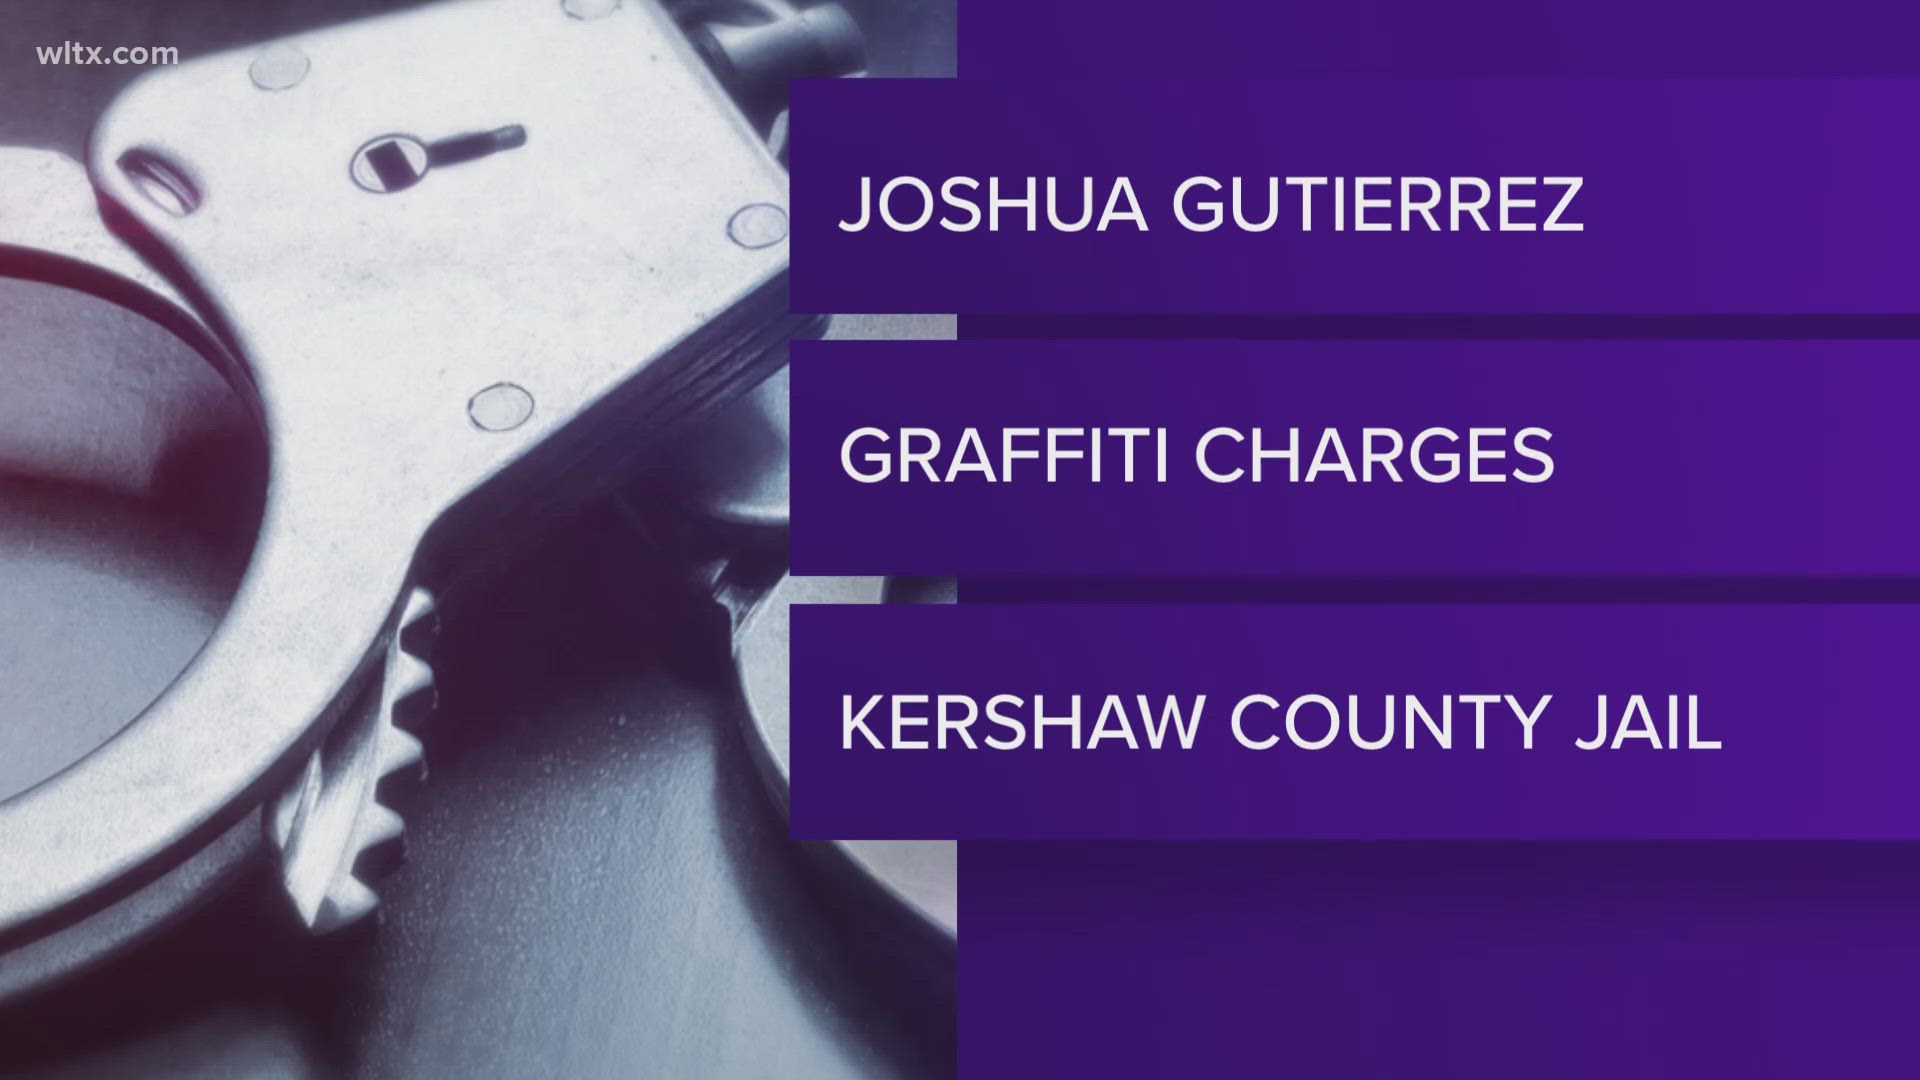 Joshua Gutierrez from Camden was arrested and taken to the Kershaw County jail.